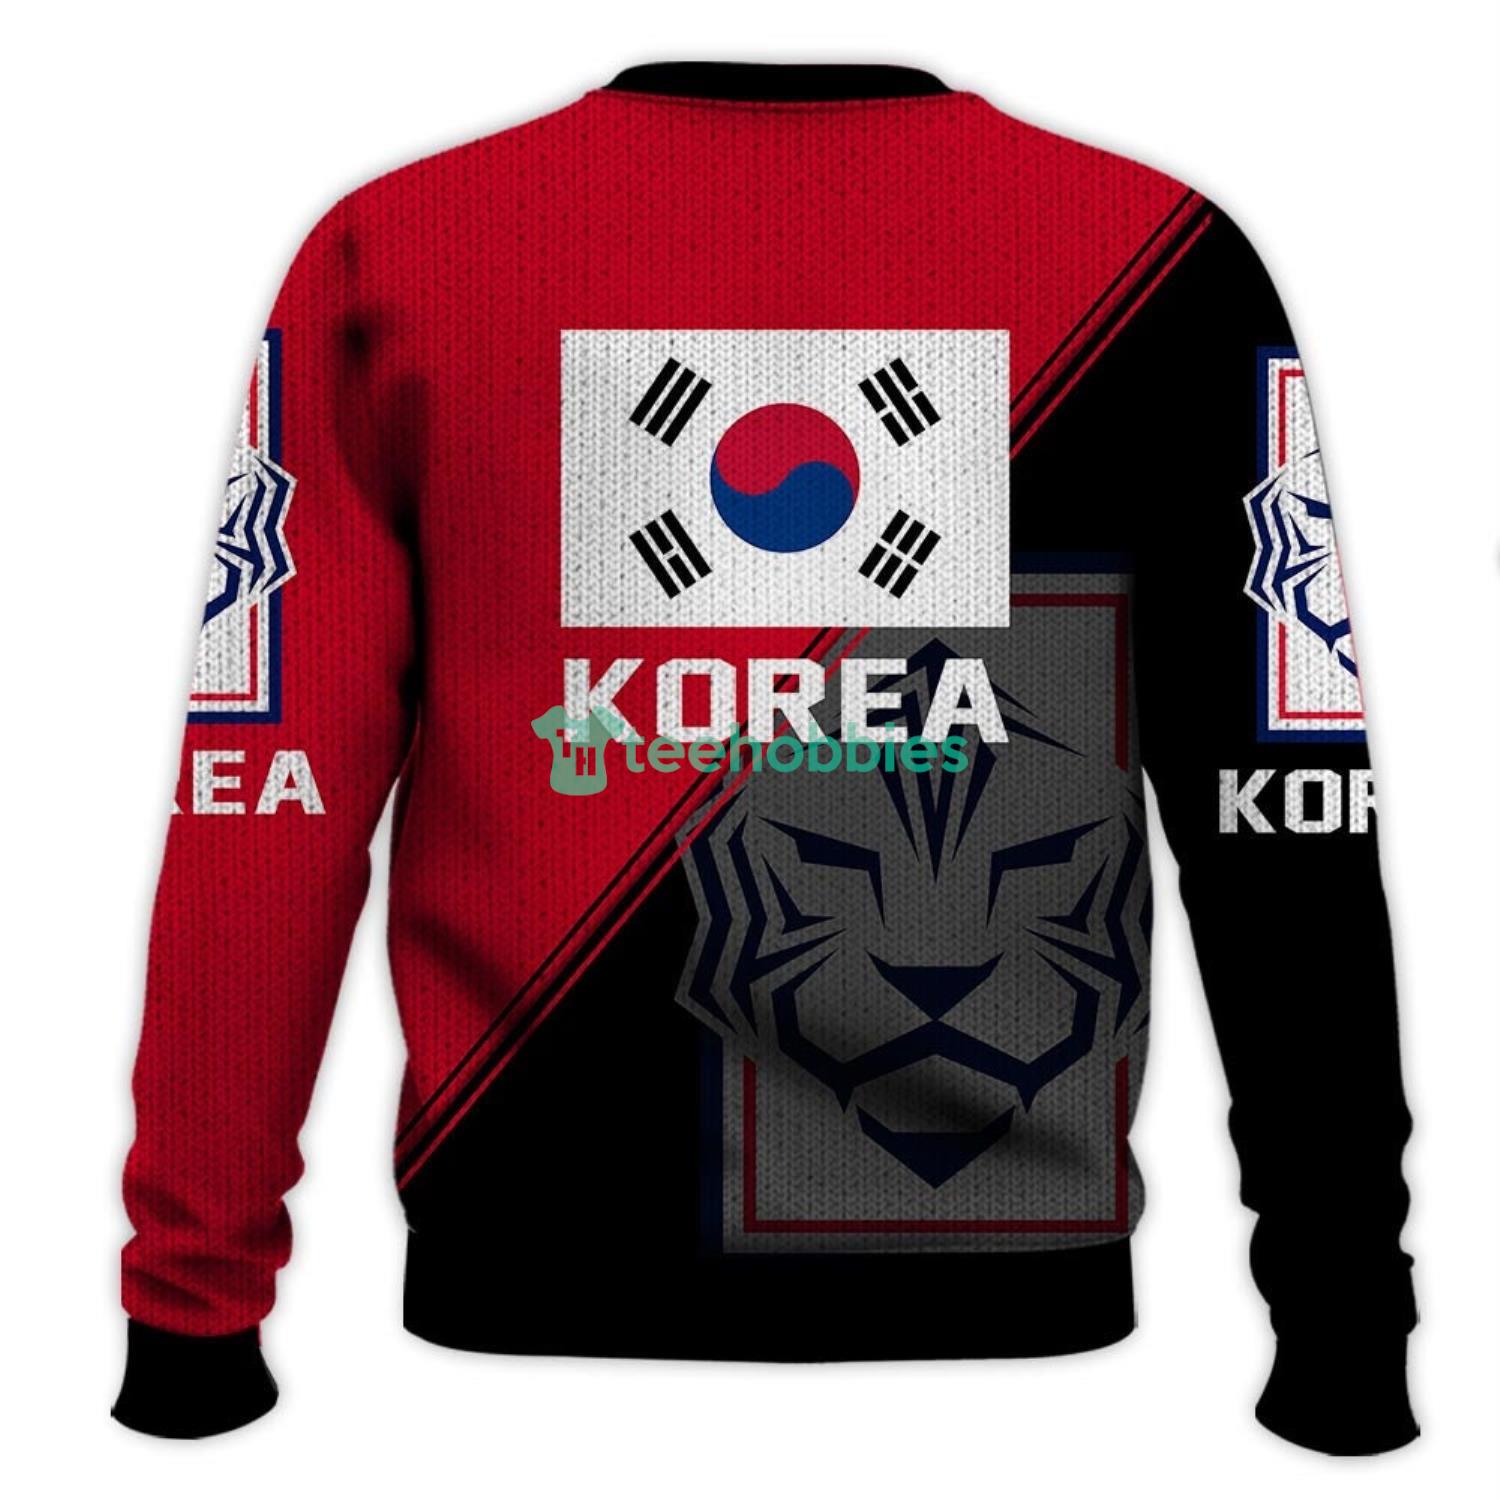 Korea Republic National Soccer Team Qatar World Cup 2022 Champions Soccer Team 3D All Over Printed Shirt Product Photo 3